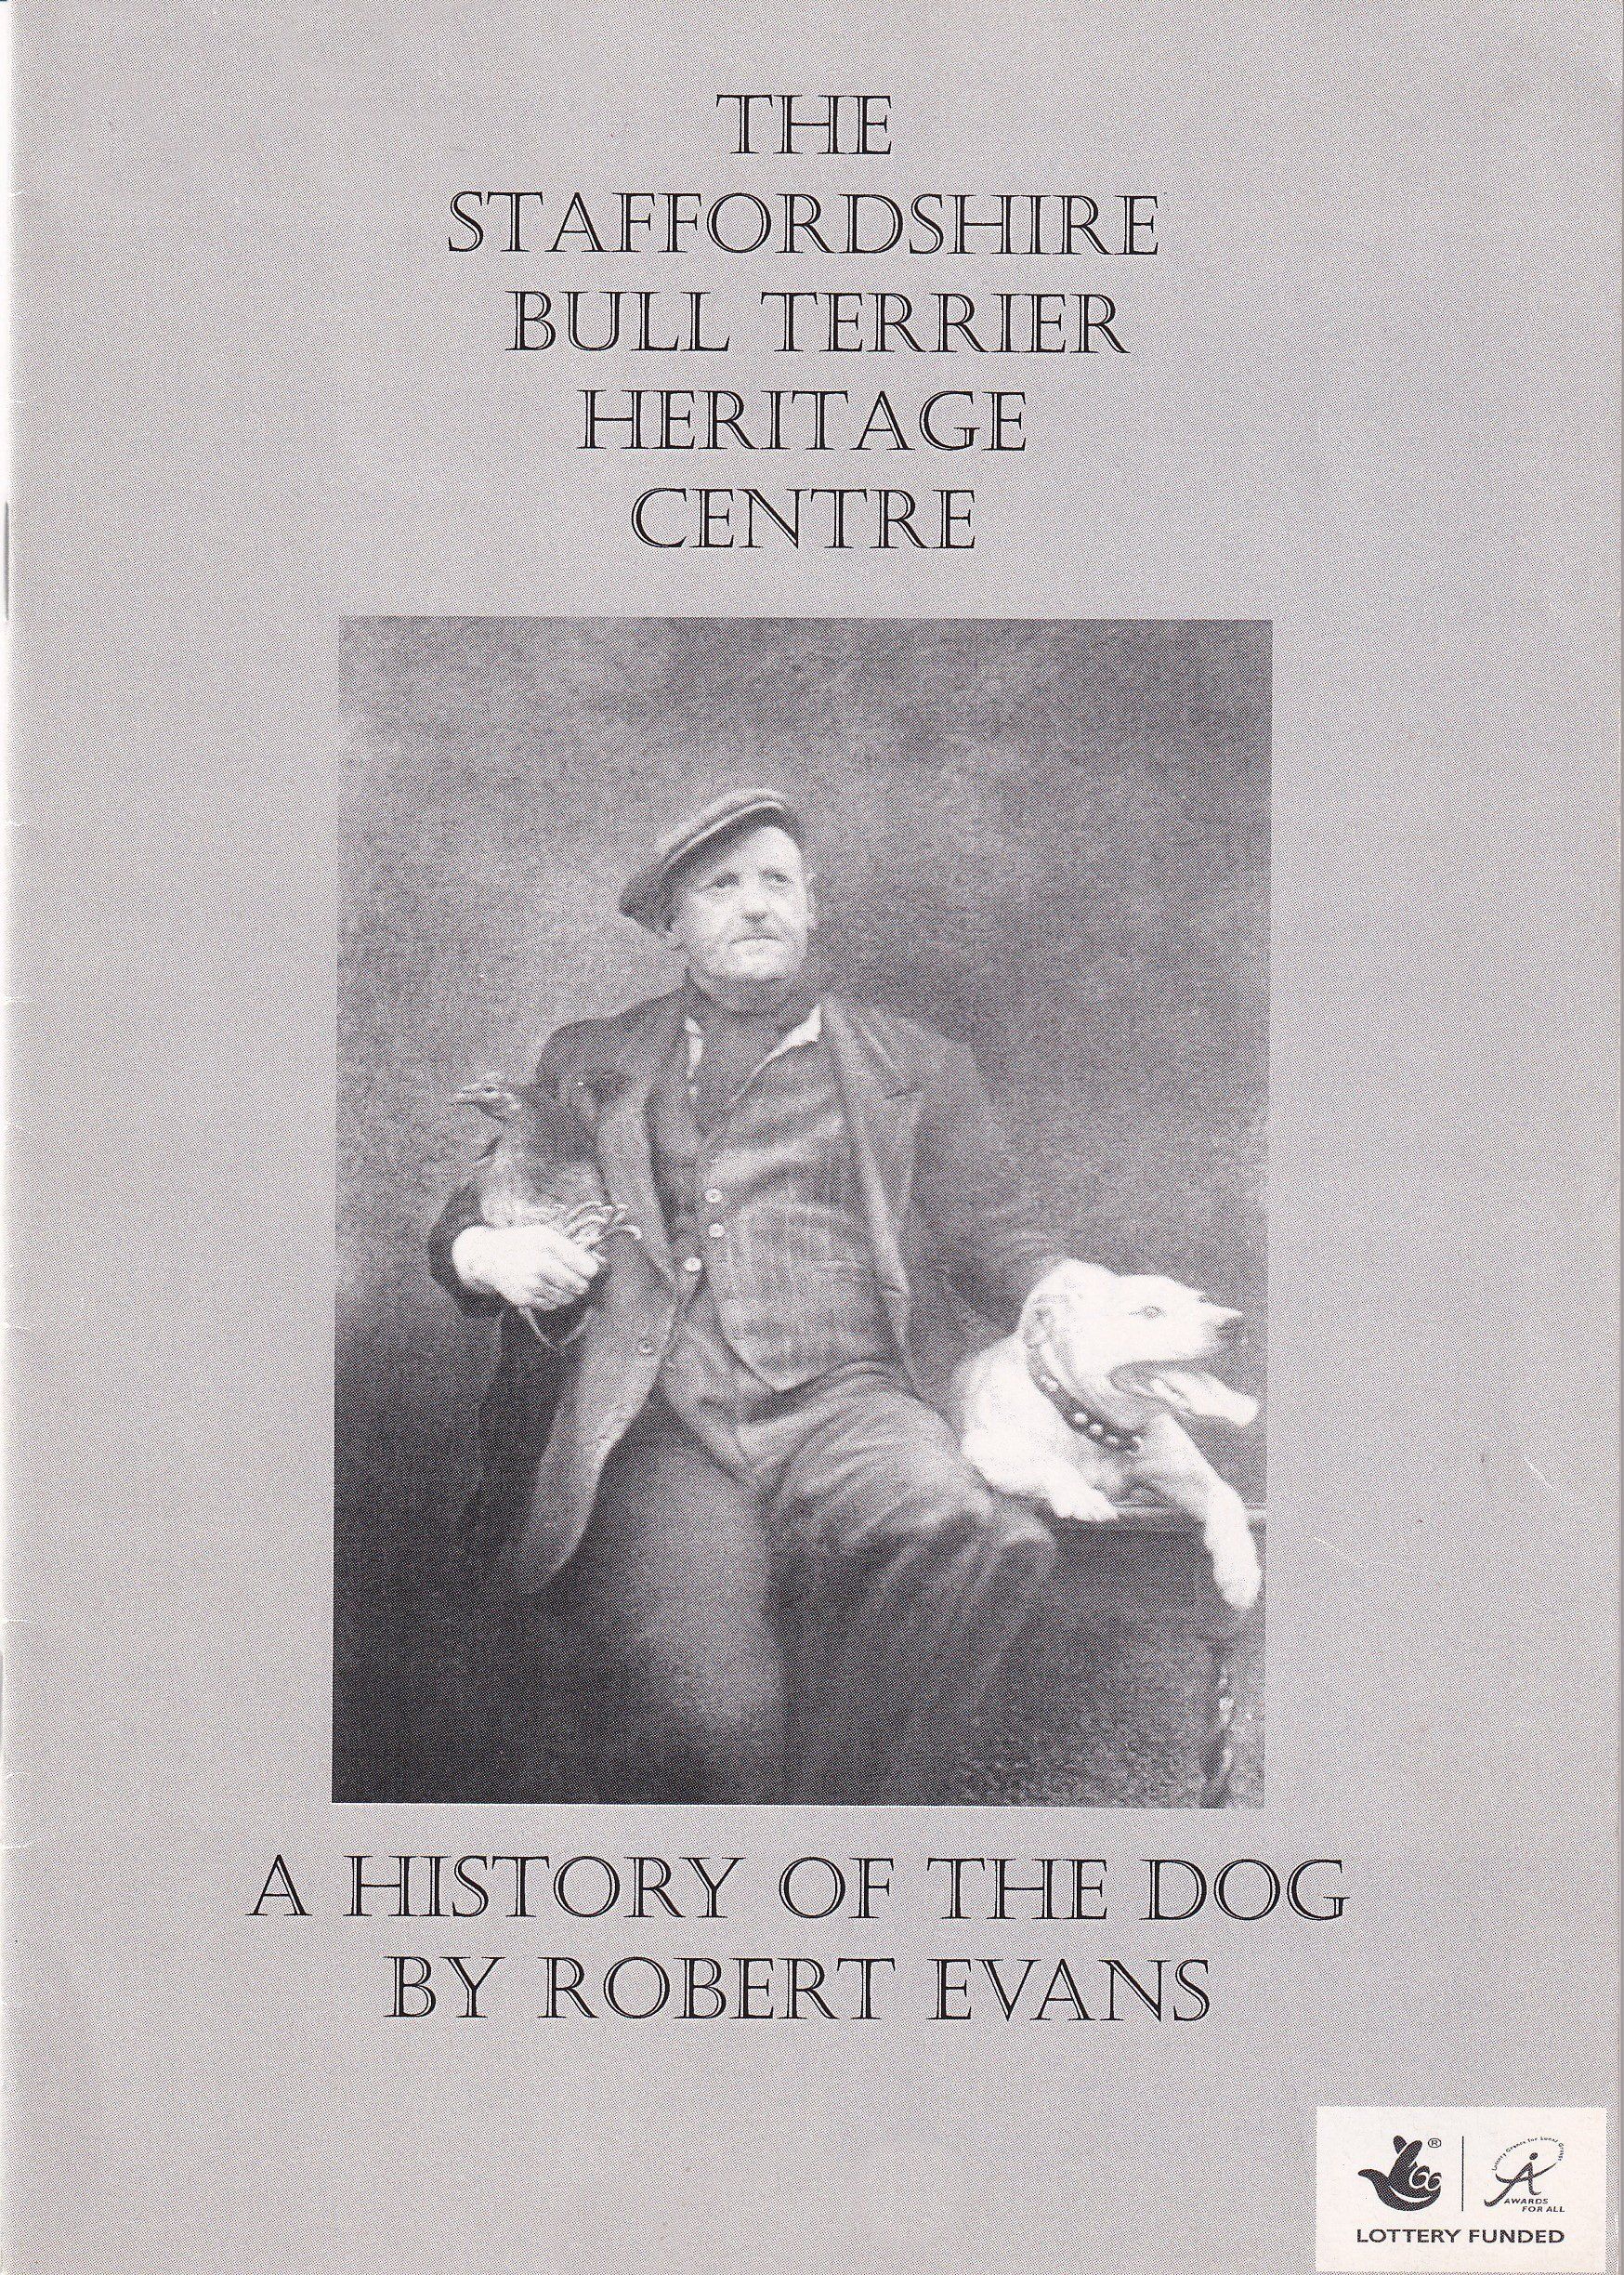 A HISTORY OF THE STAFFORDSHIRE BULL TERRIER IN MEMORY OF KEVIN LEYDEN A TRUE FRIEND